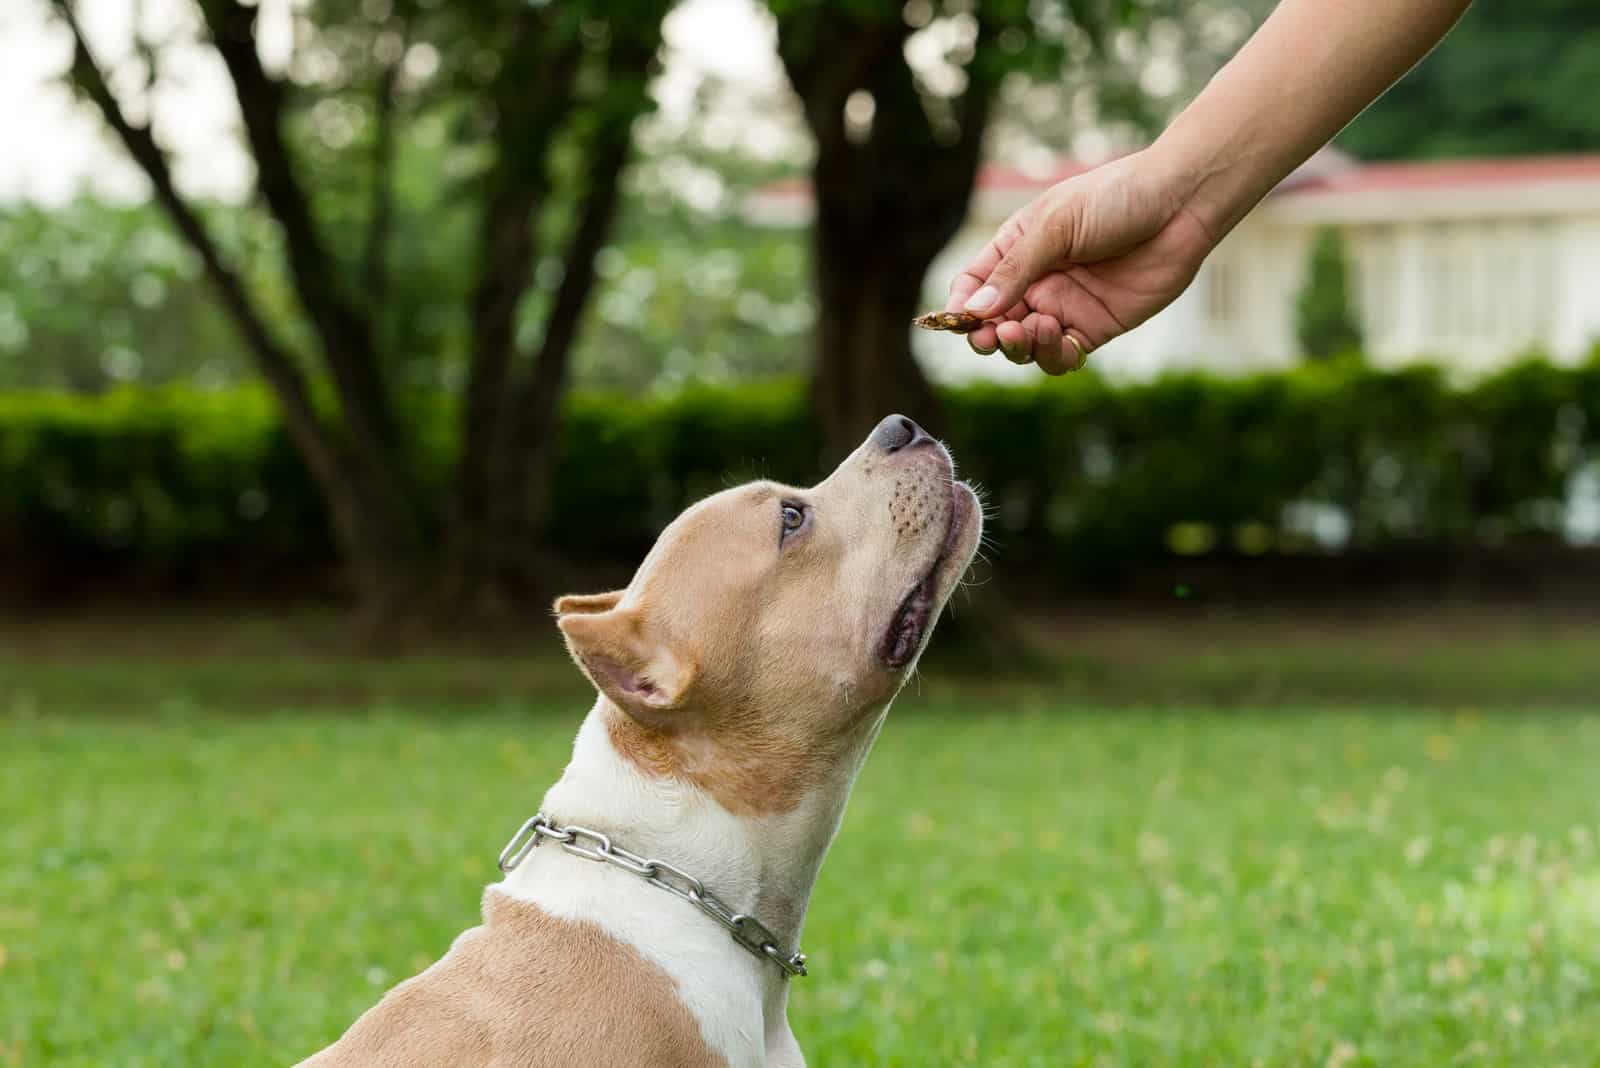 american pocket bully smelling food from man's hand